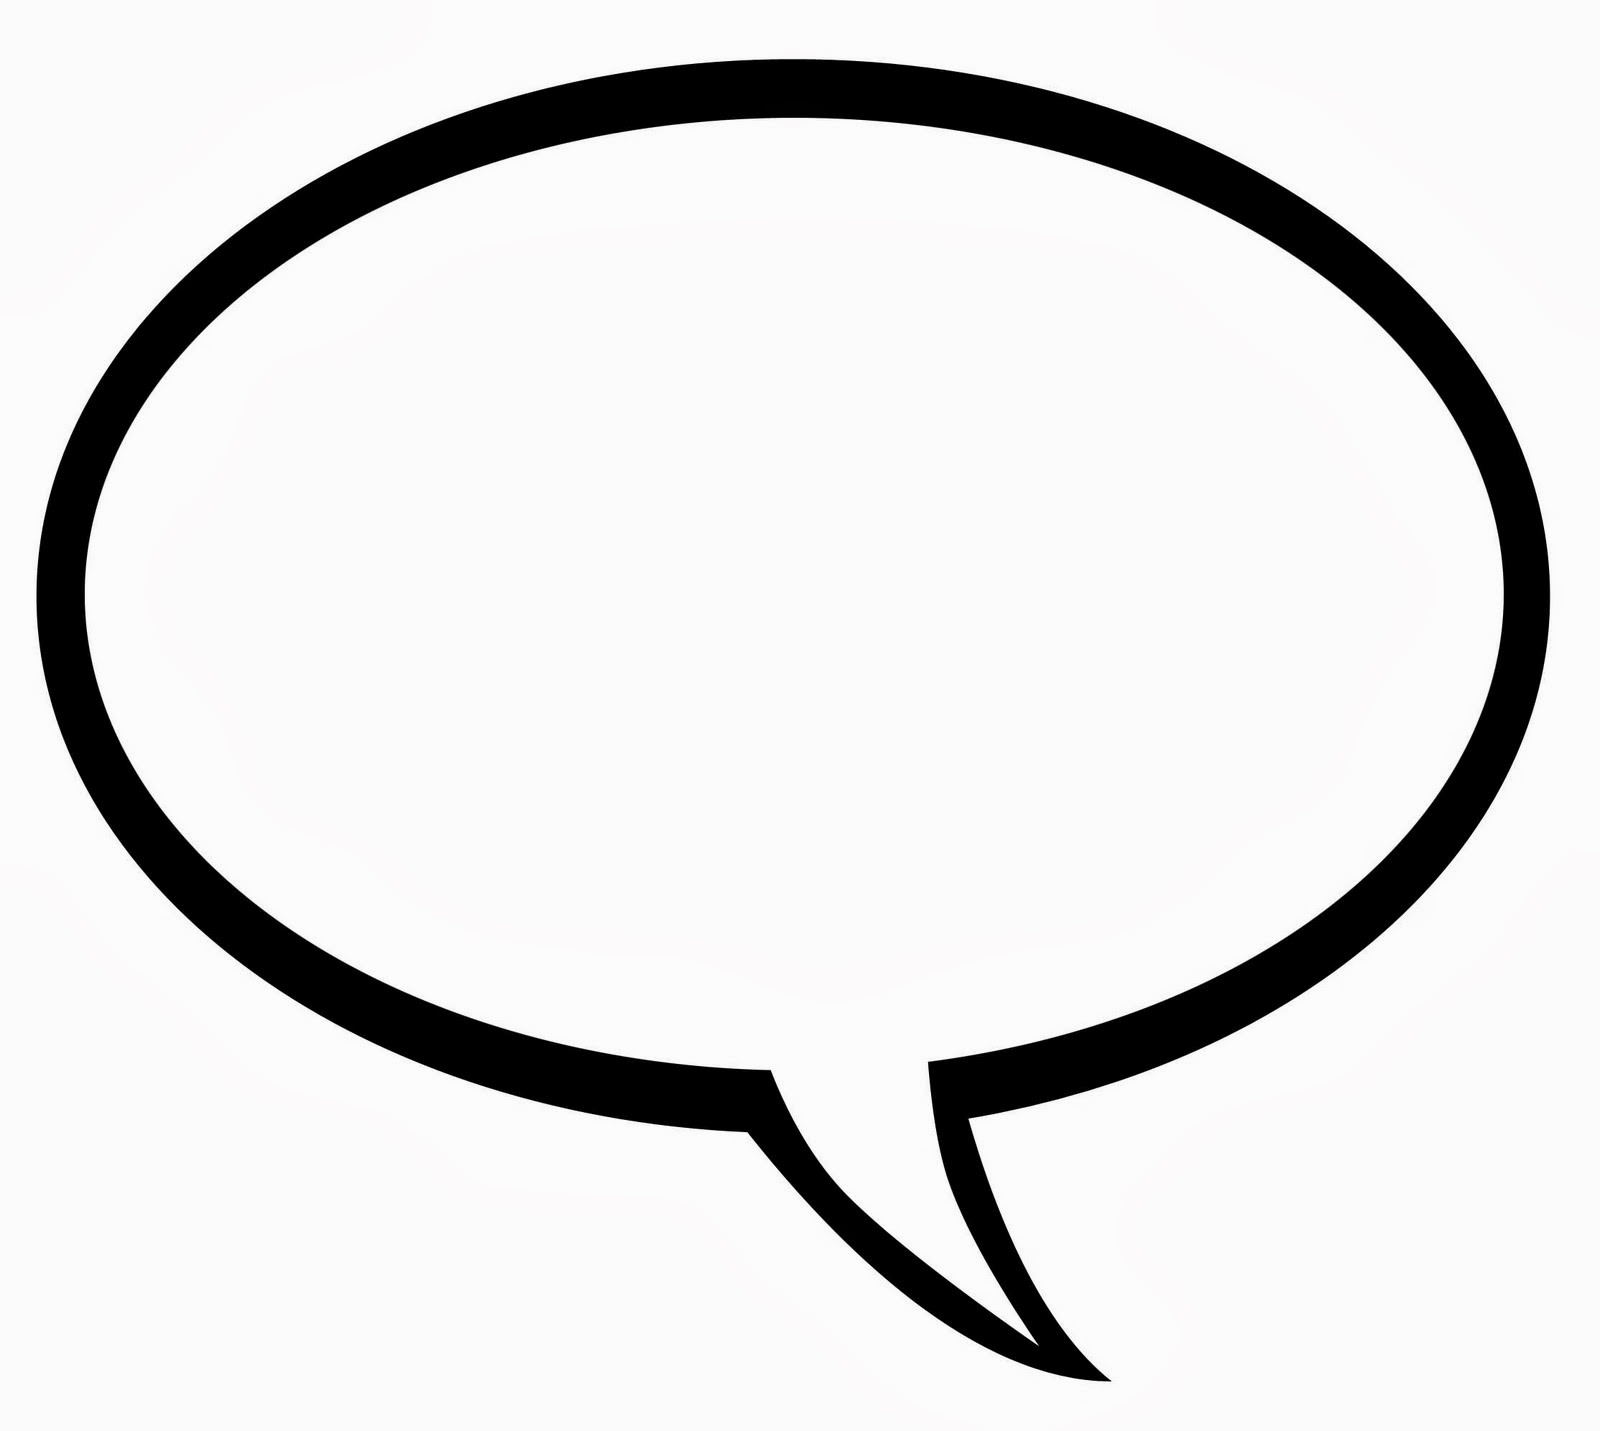 Free Speech Bubble Png, Download Free Clip Art, Free Clip